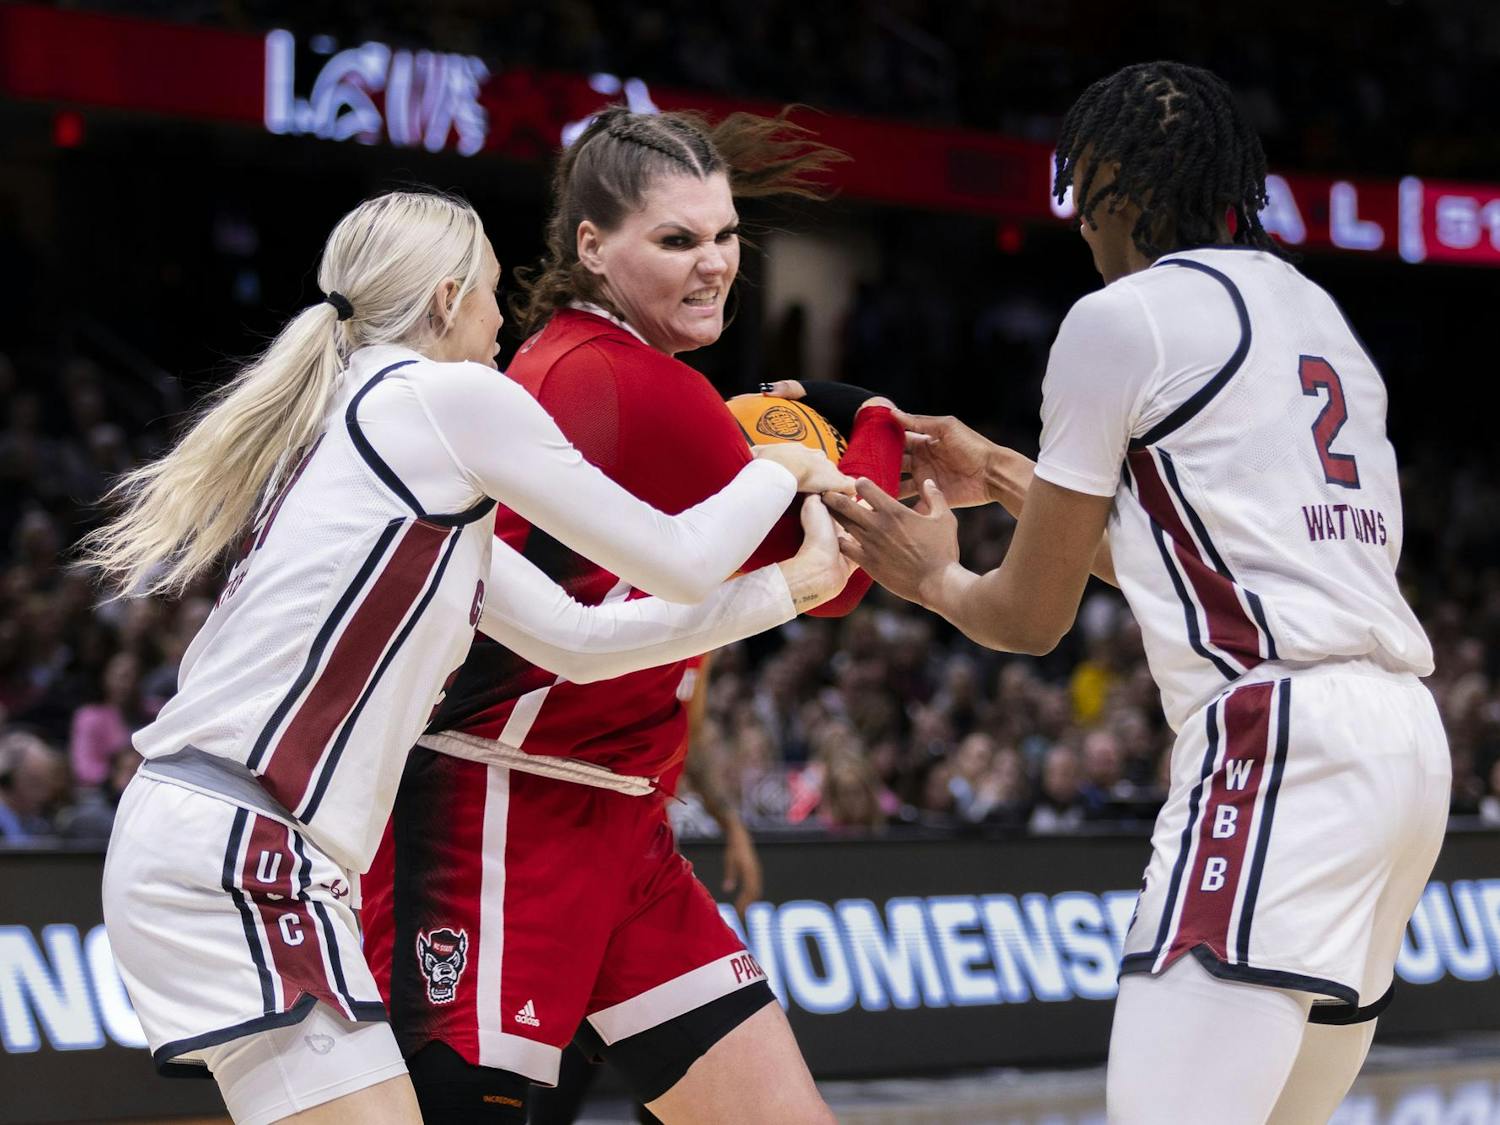 Sophomore forward Chloe Kitts and sophomore forward Ashlyn Watkins fight for the ball during the NCAA semifinal matchup of South Carolina and NC State. The Gamecocks limited the Wolf Pack to only 6 points in the third quarter.